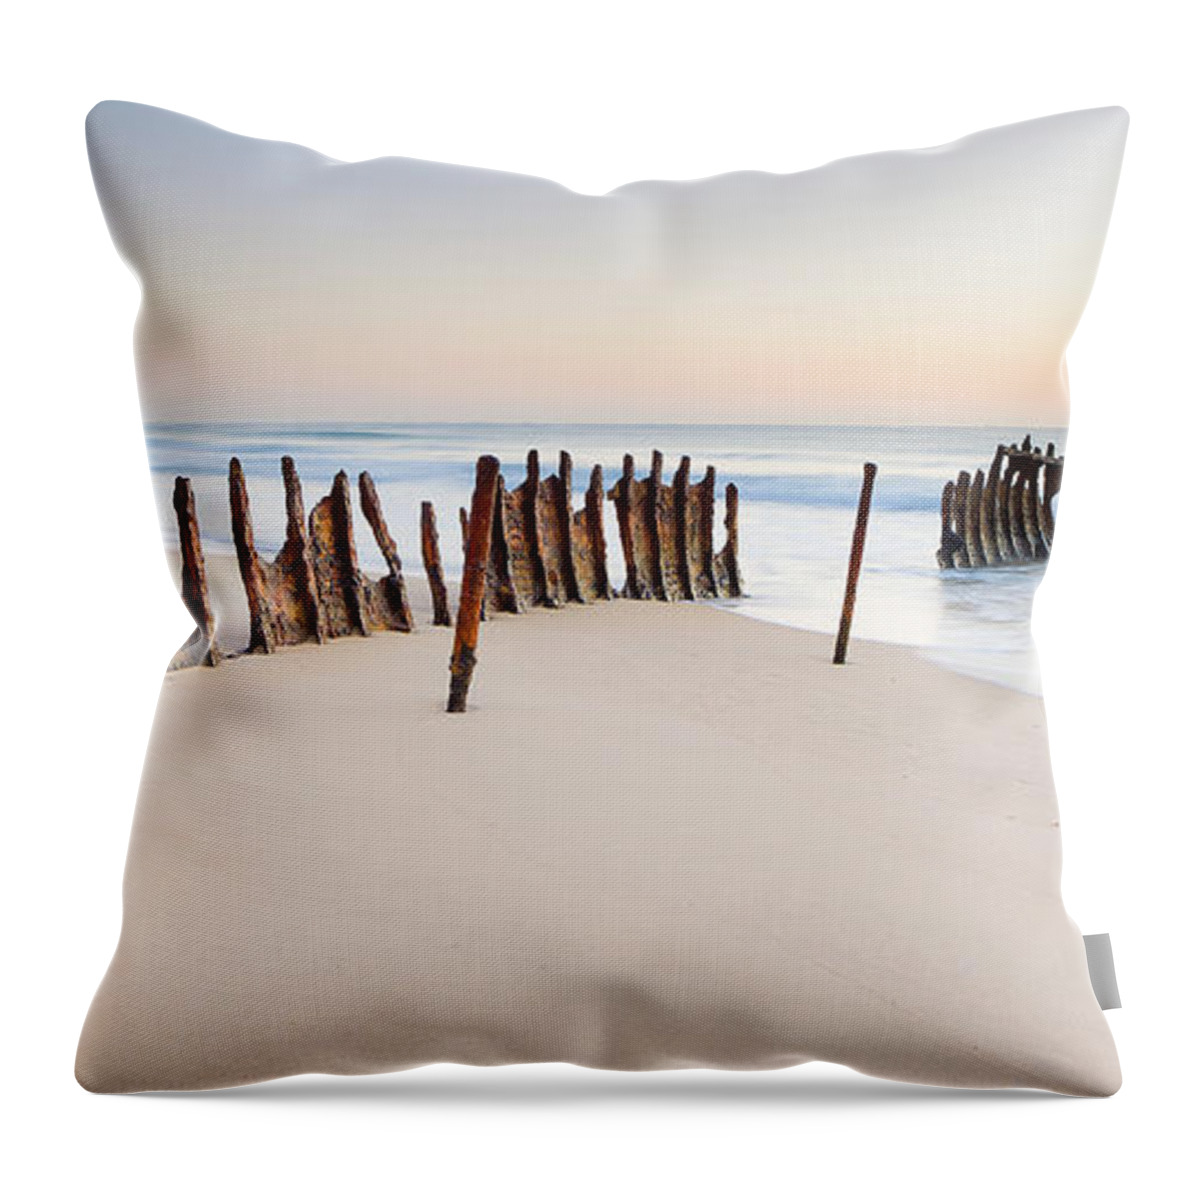 Outdoors Throw Pillow featuring the photograph Dicky Beach by Visual Clarity Photography